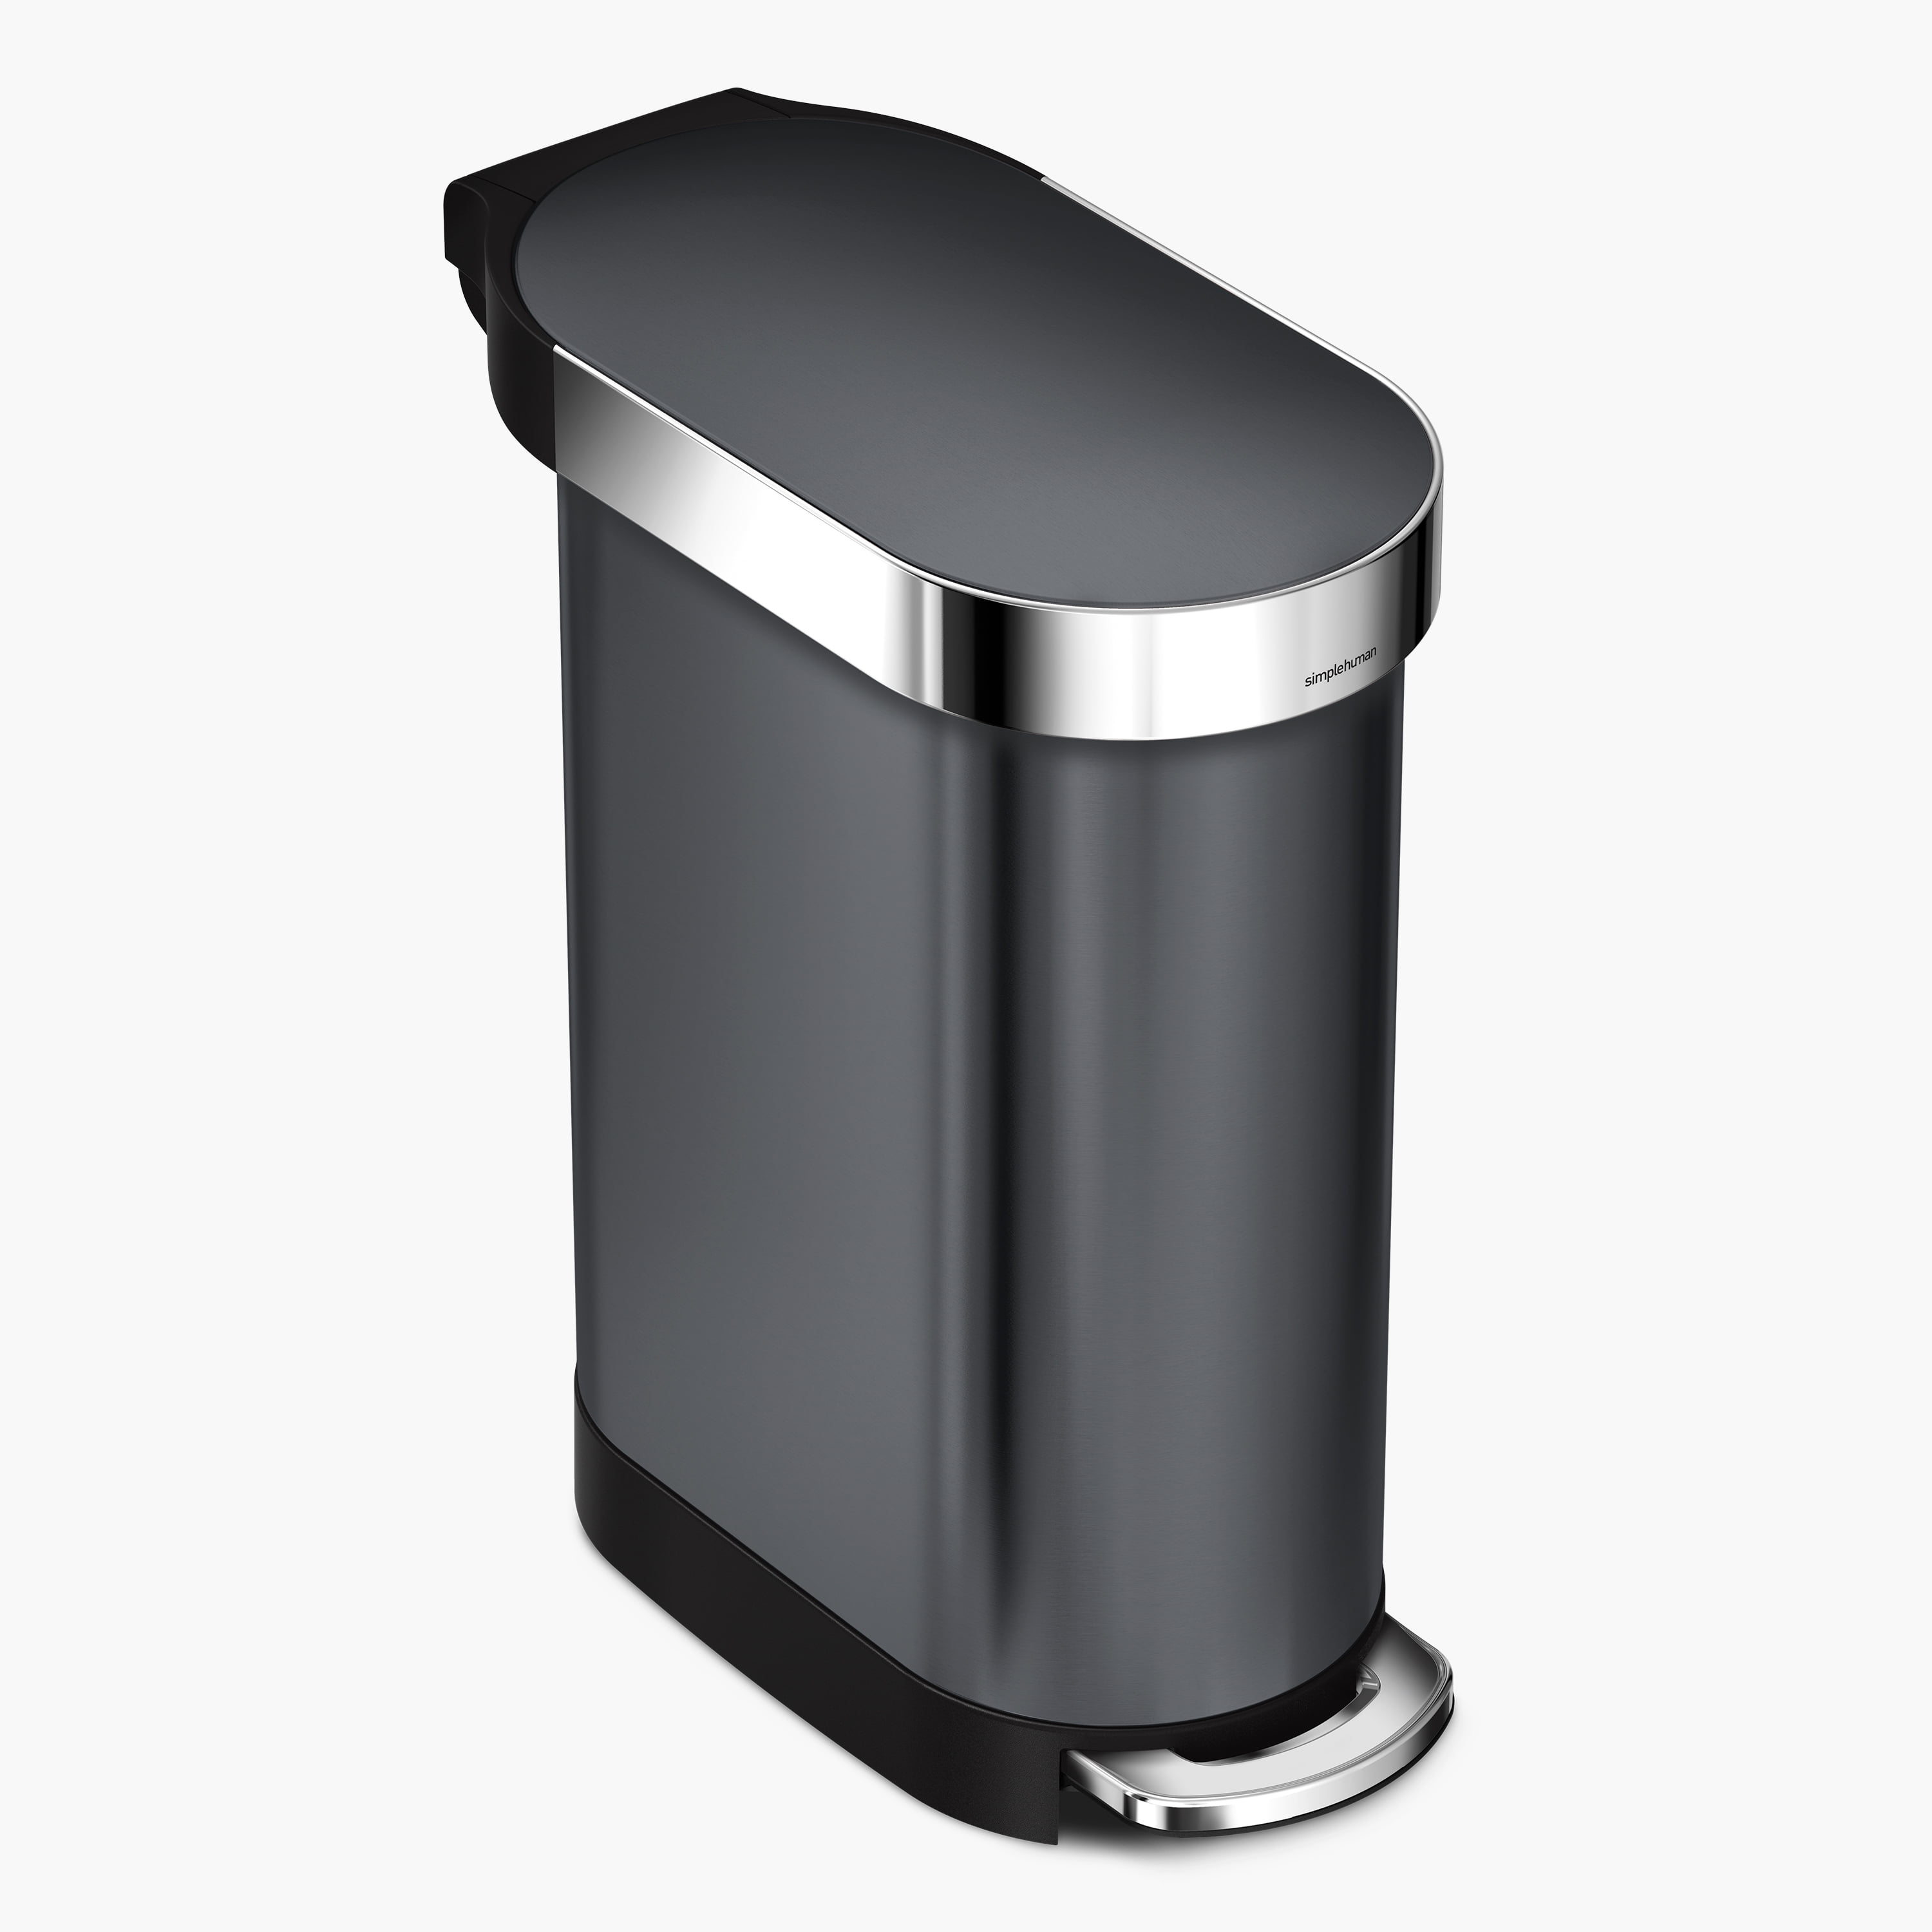 simplehuman 45 Liter / 12 Gallon Slim Hands-Free Kitchen Step Trash Can Kitchen Trash Can Black Stainless Steel